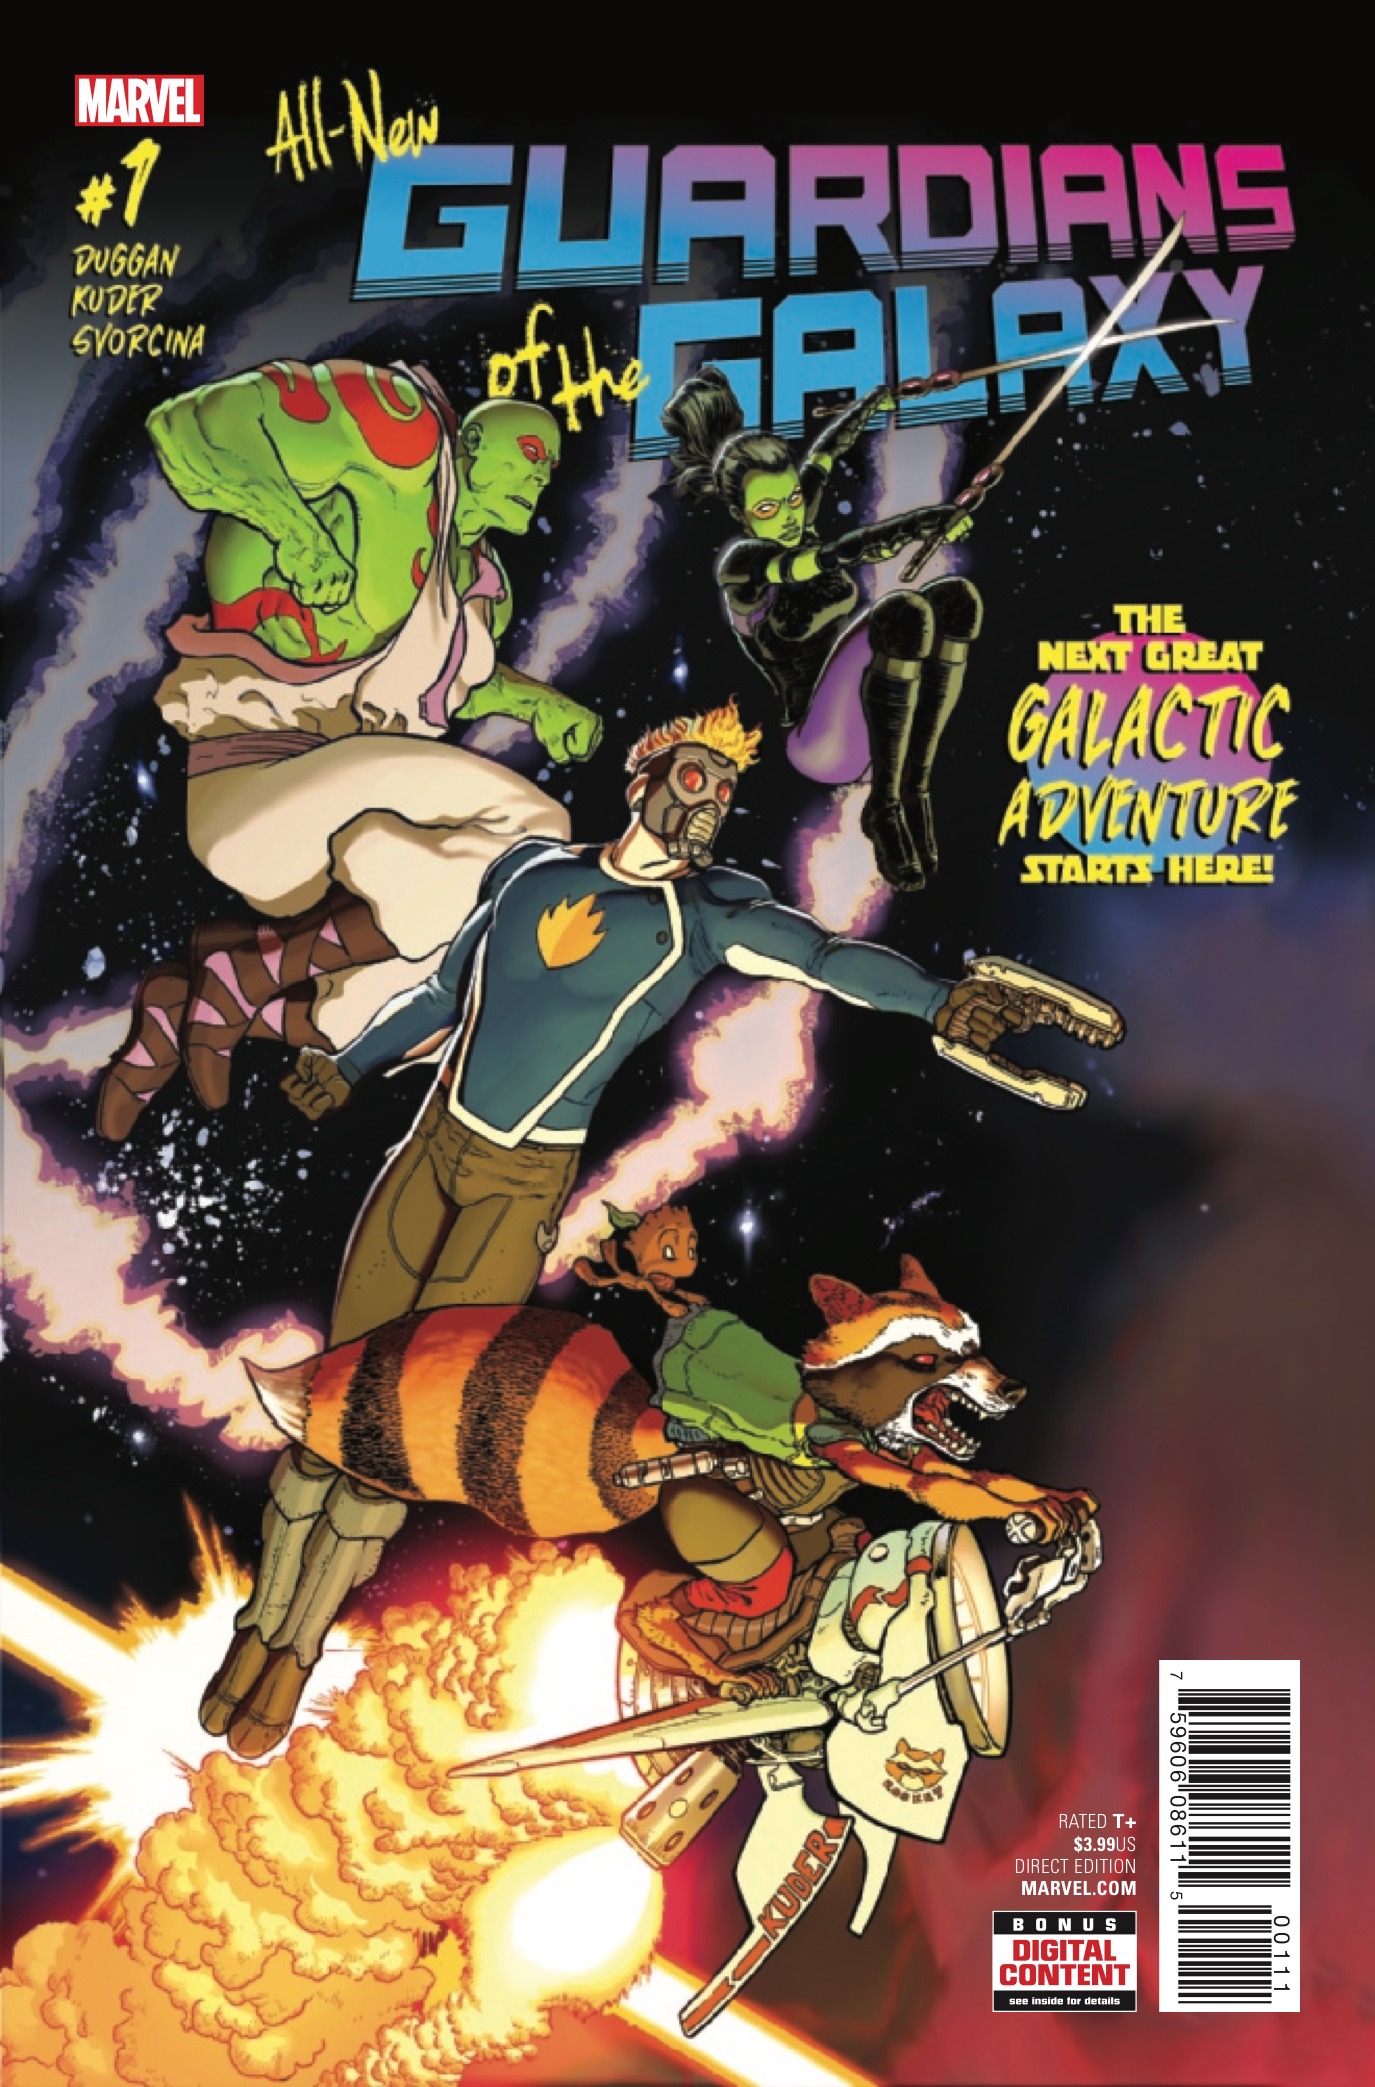 All-New Guardians of the Galaxy #1 Review